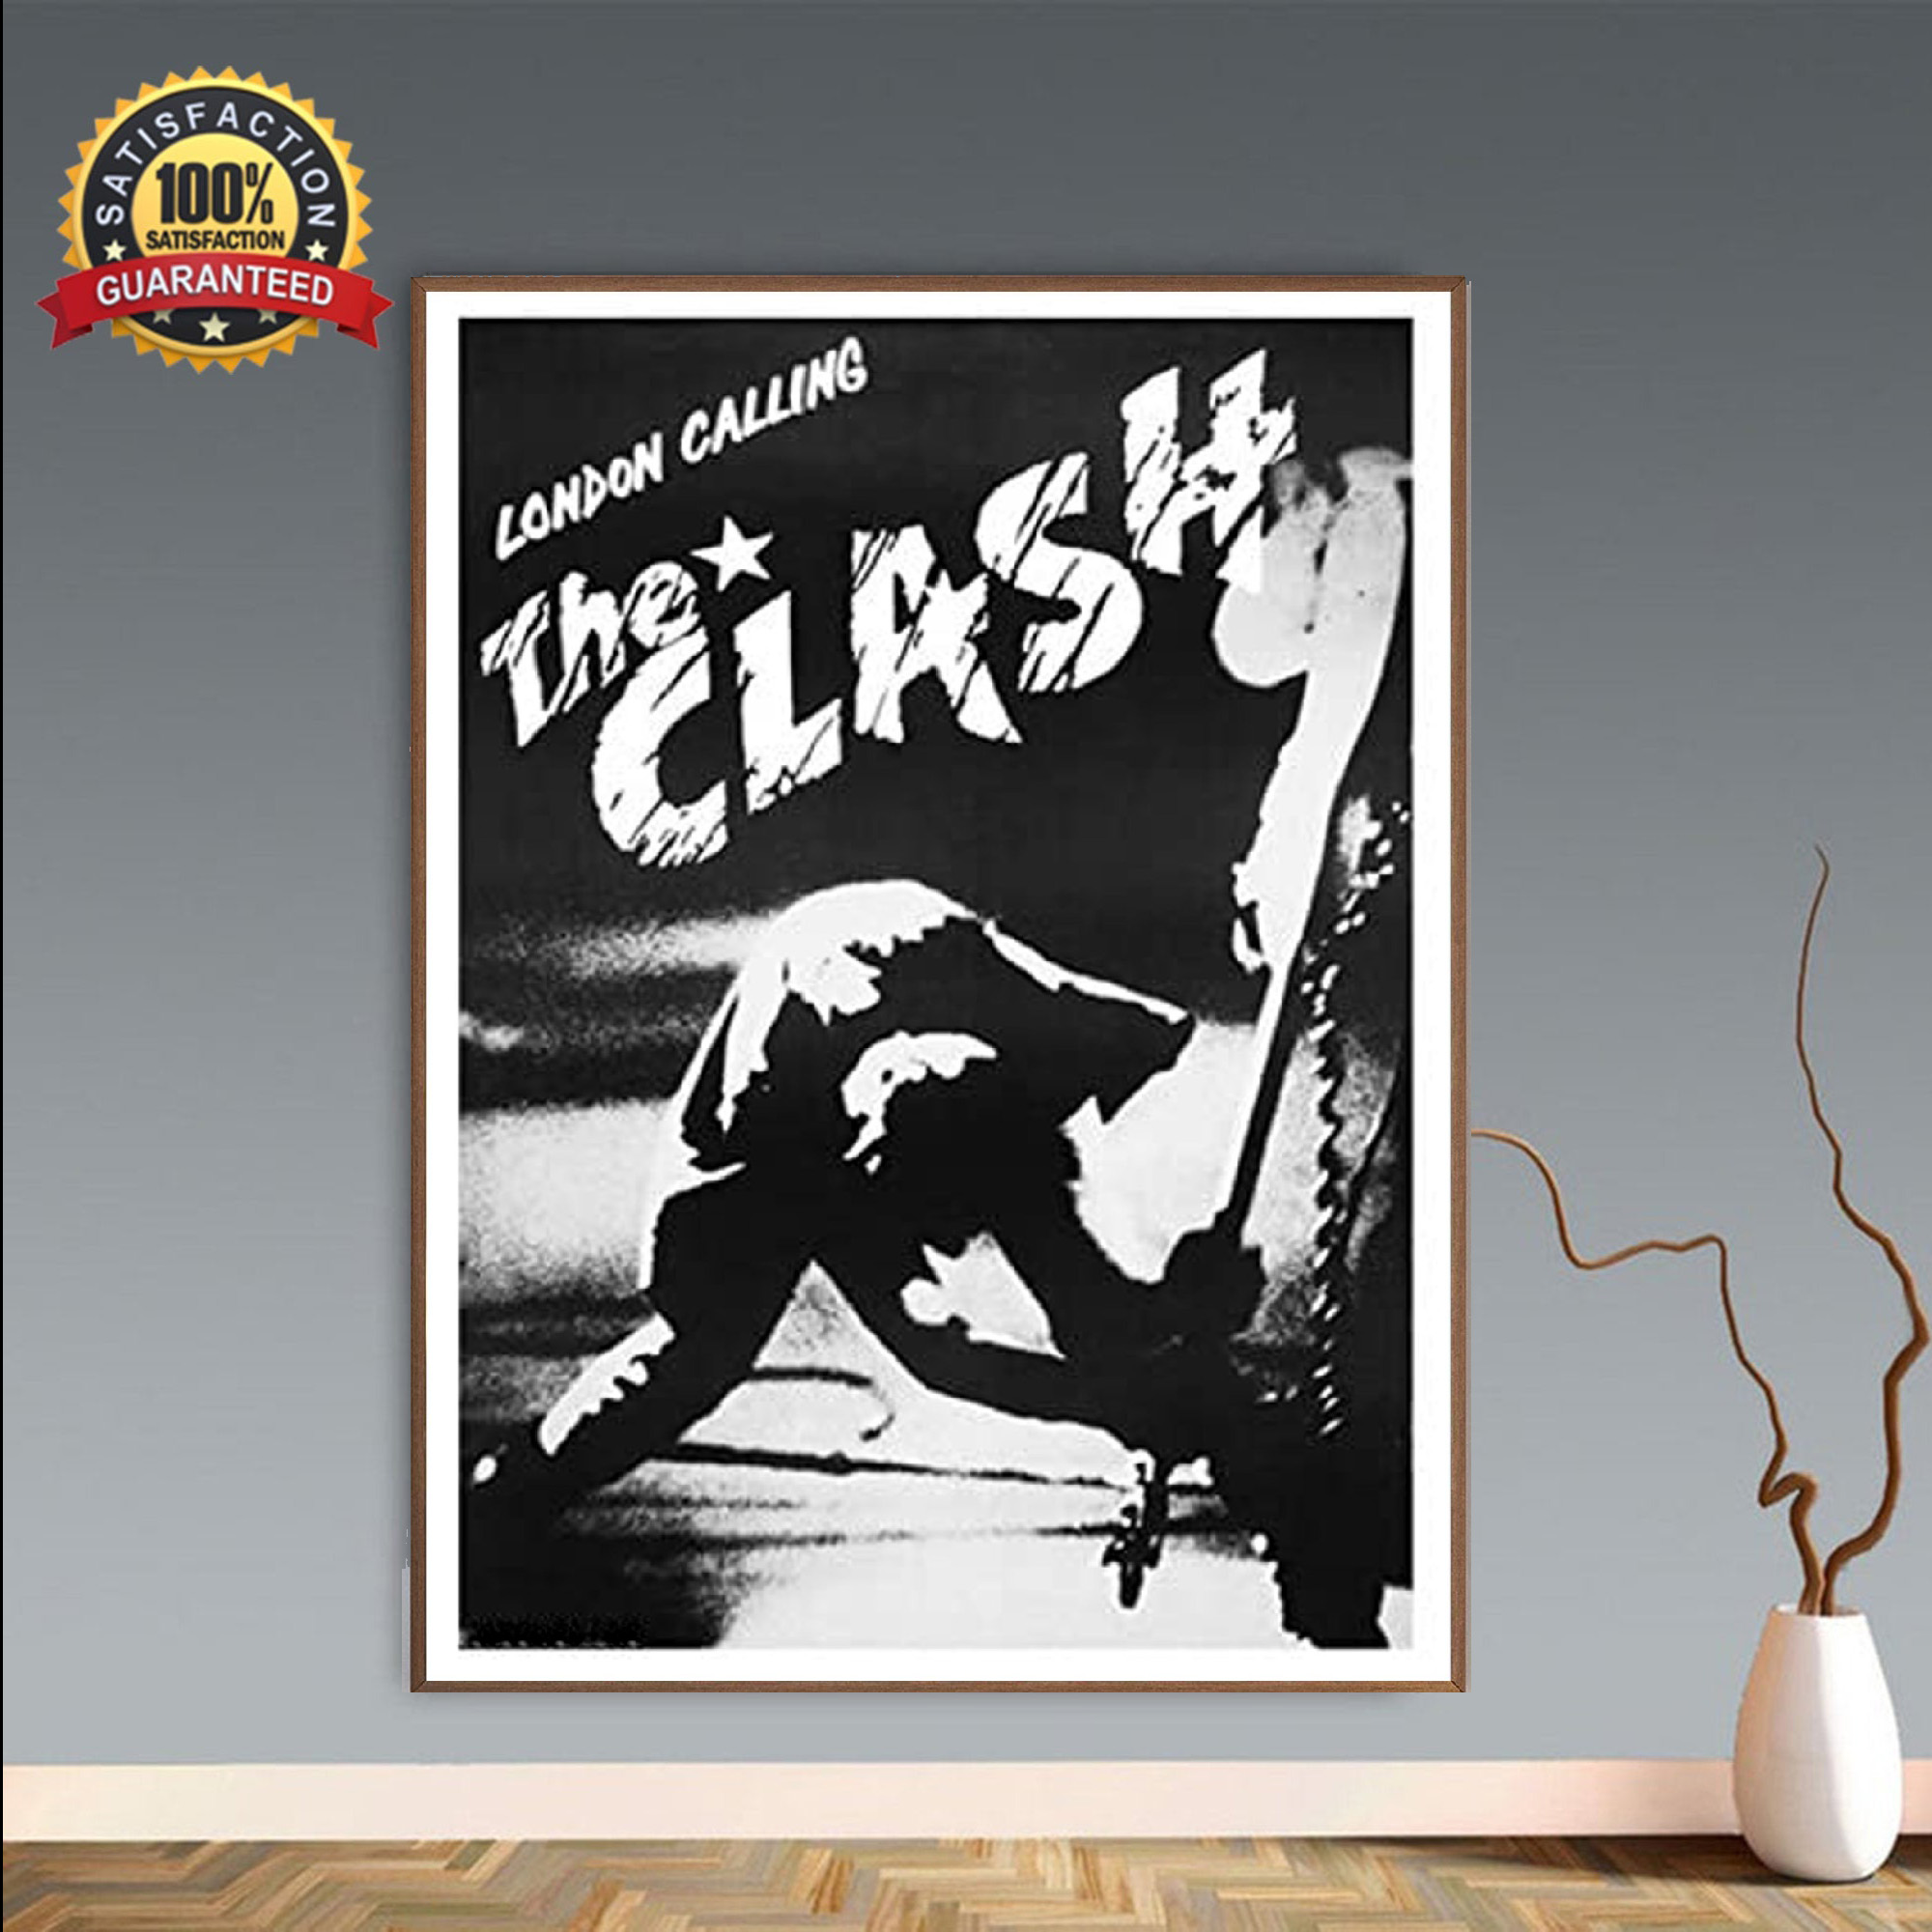 Vintage The Clash Poster The Clash Band London Calling Print Joe Strummer Poster Band Home